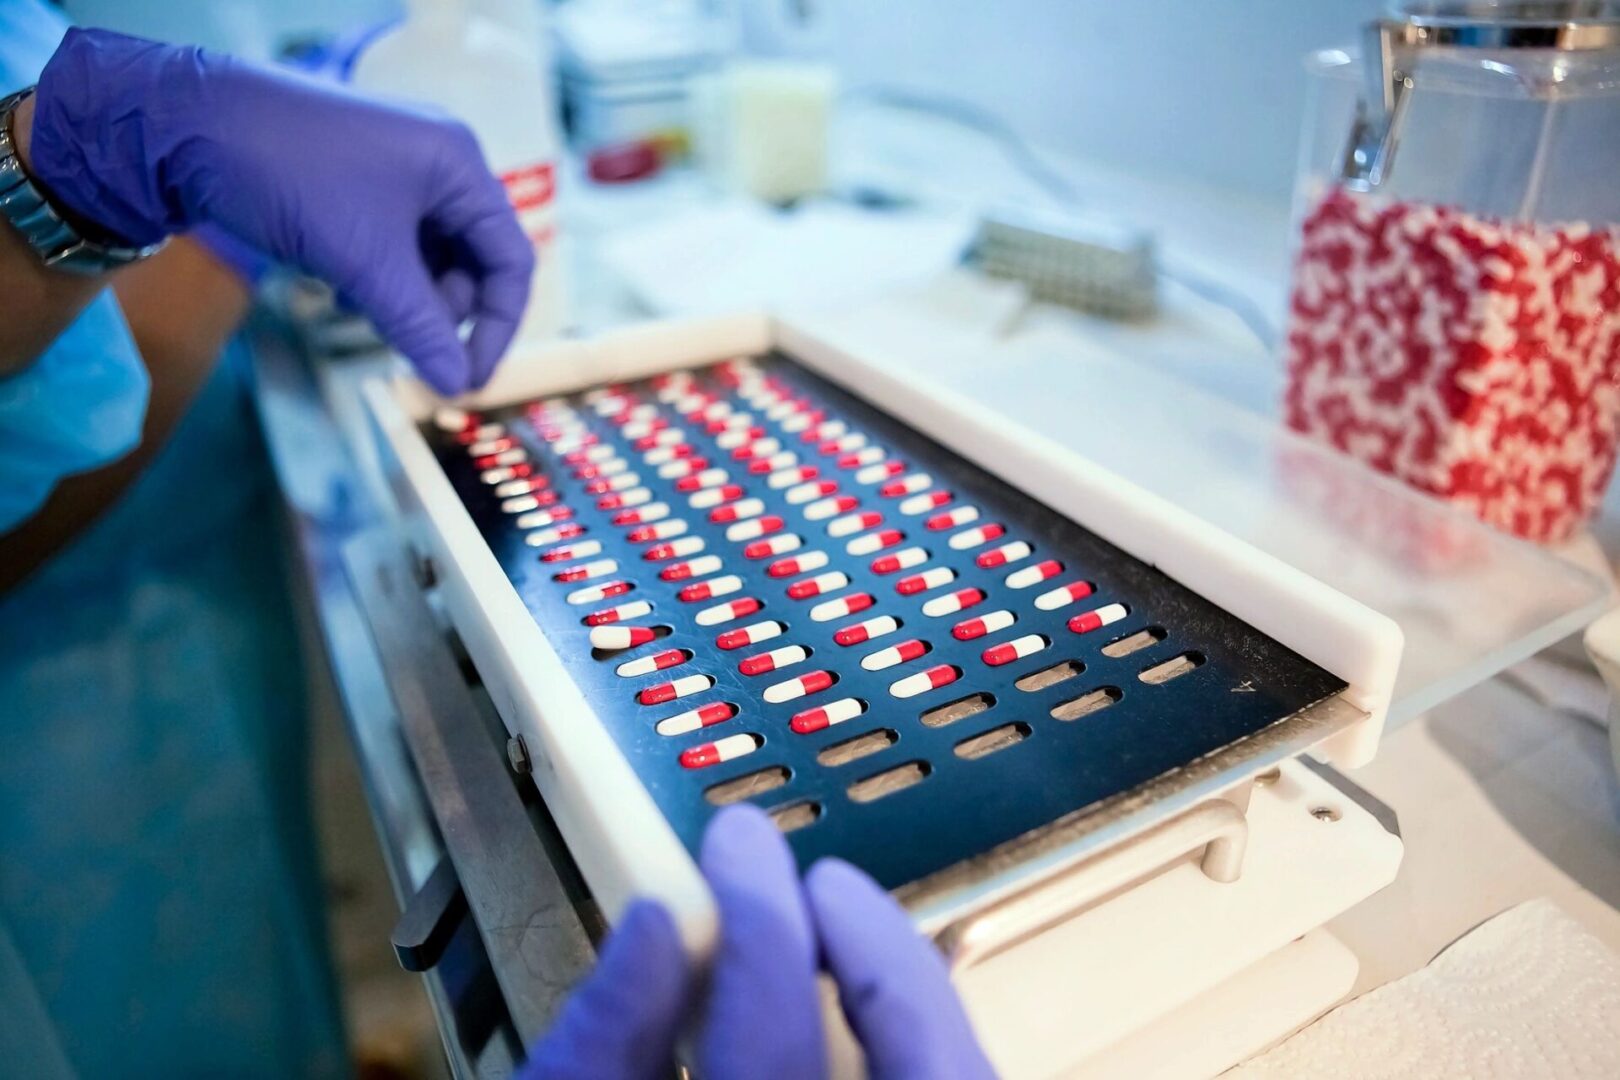 A person in blue gloves is working on a tray of pills.